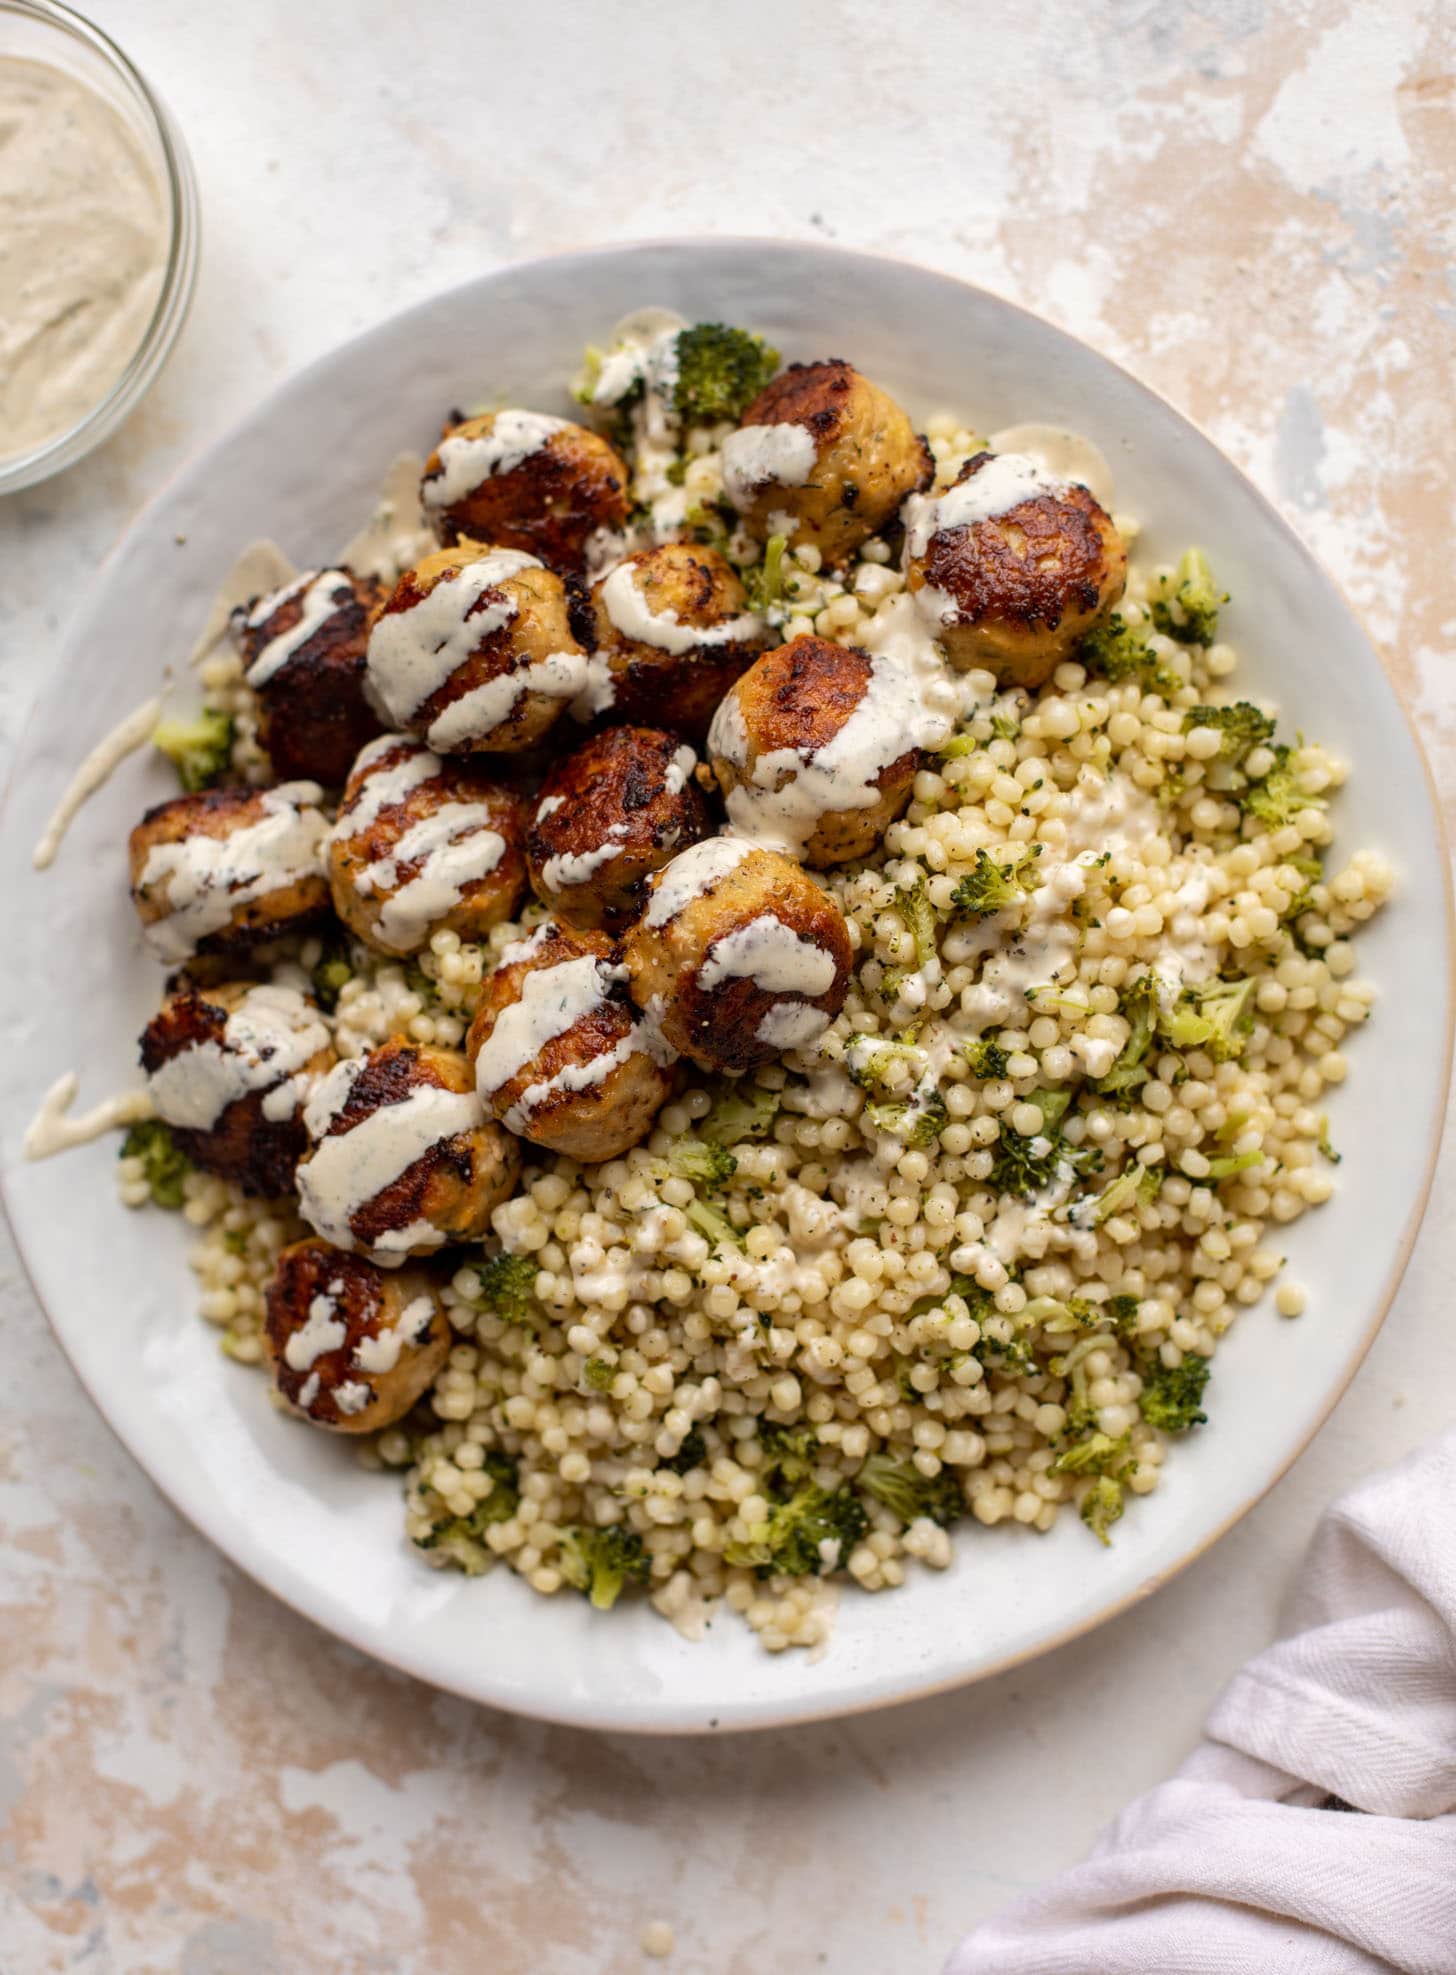 ranch chicken meatballs with broccoli couscous